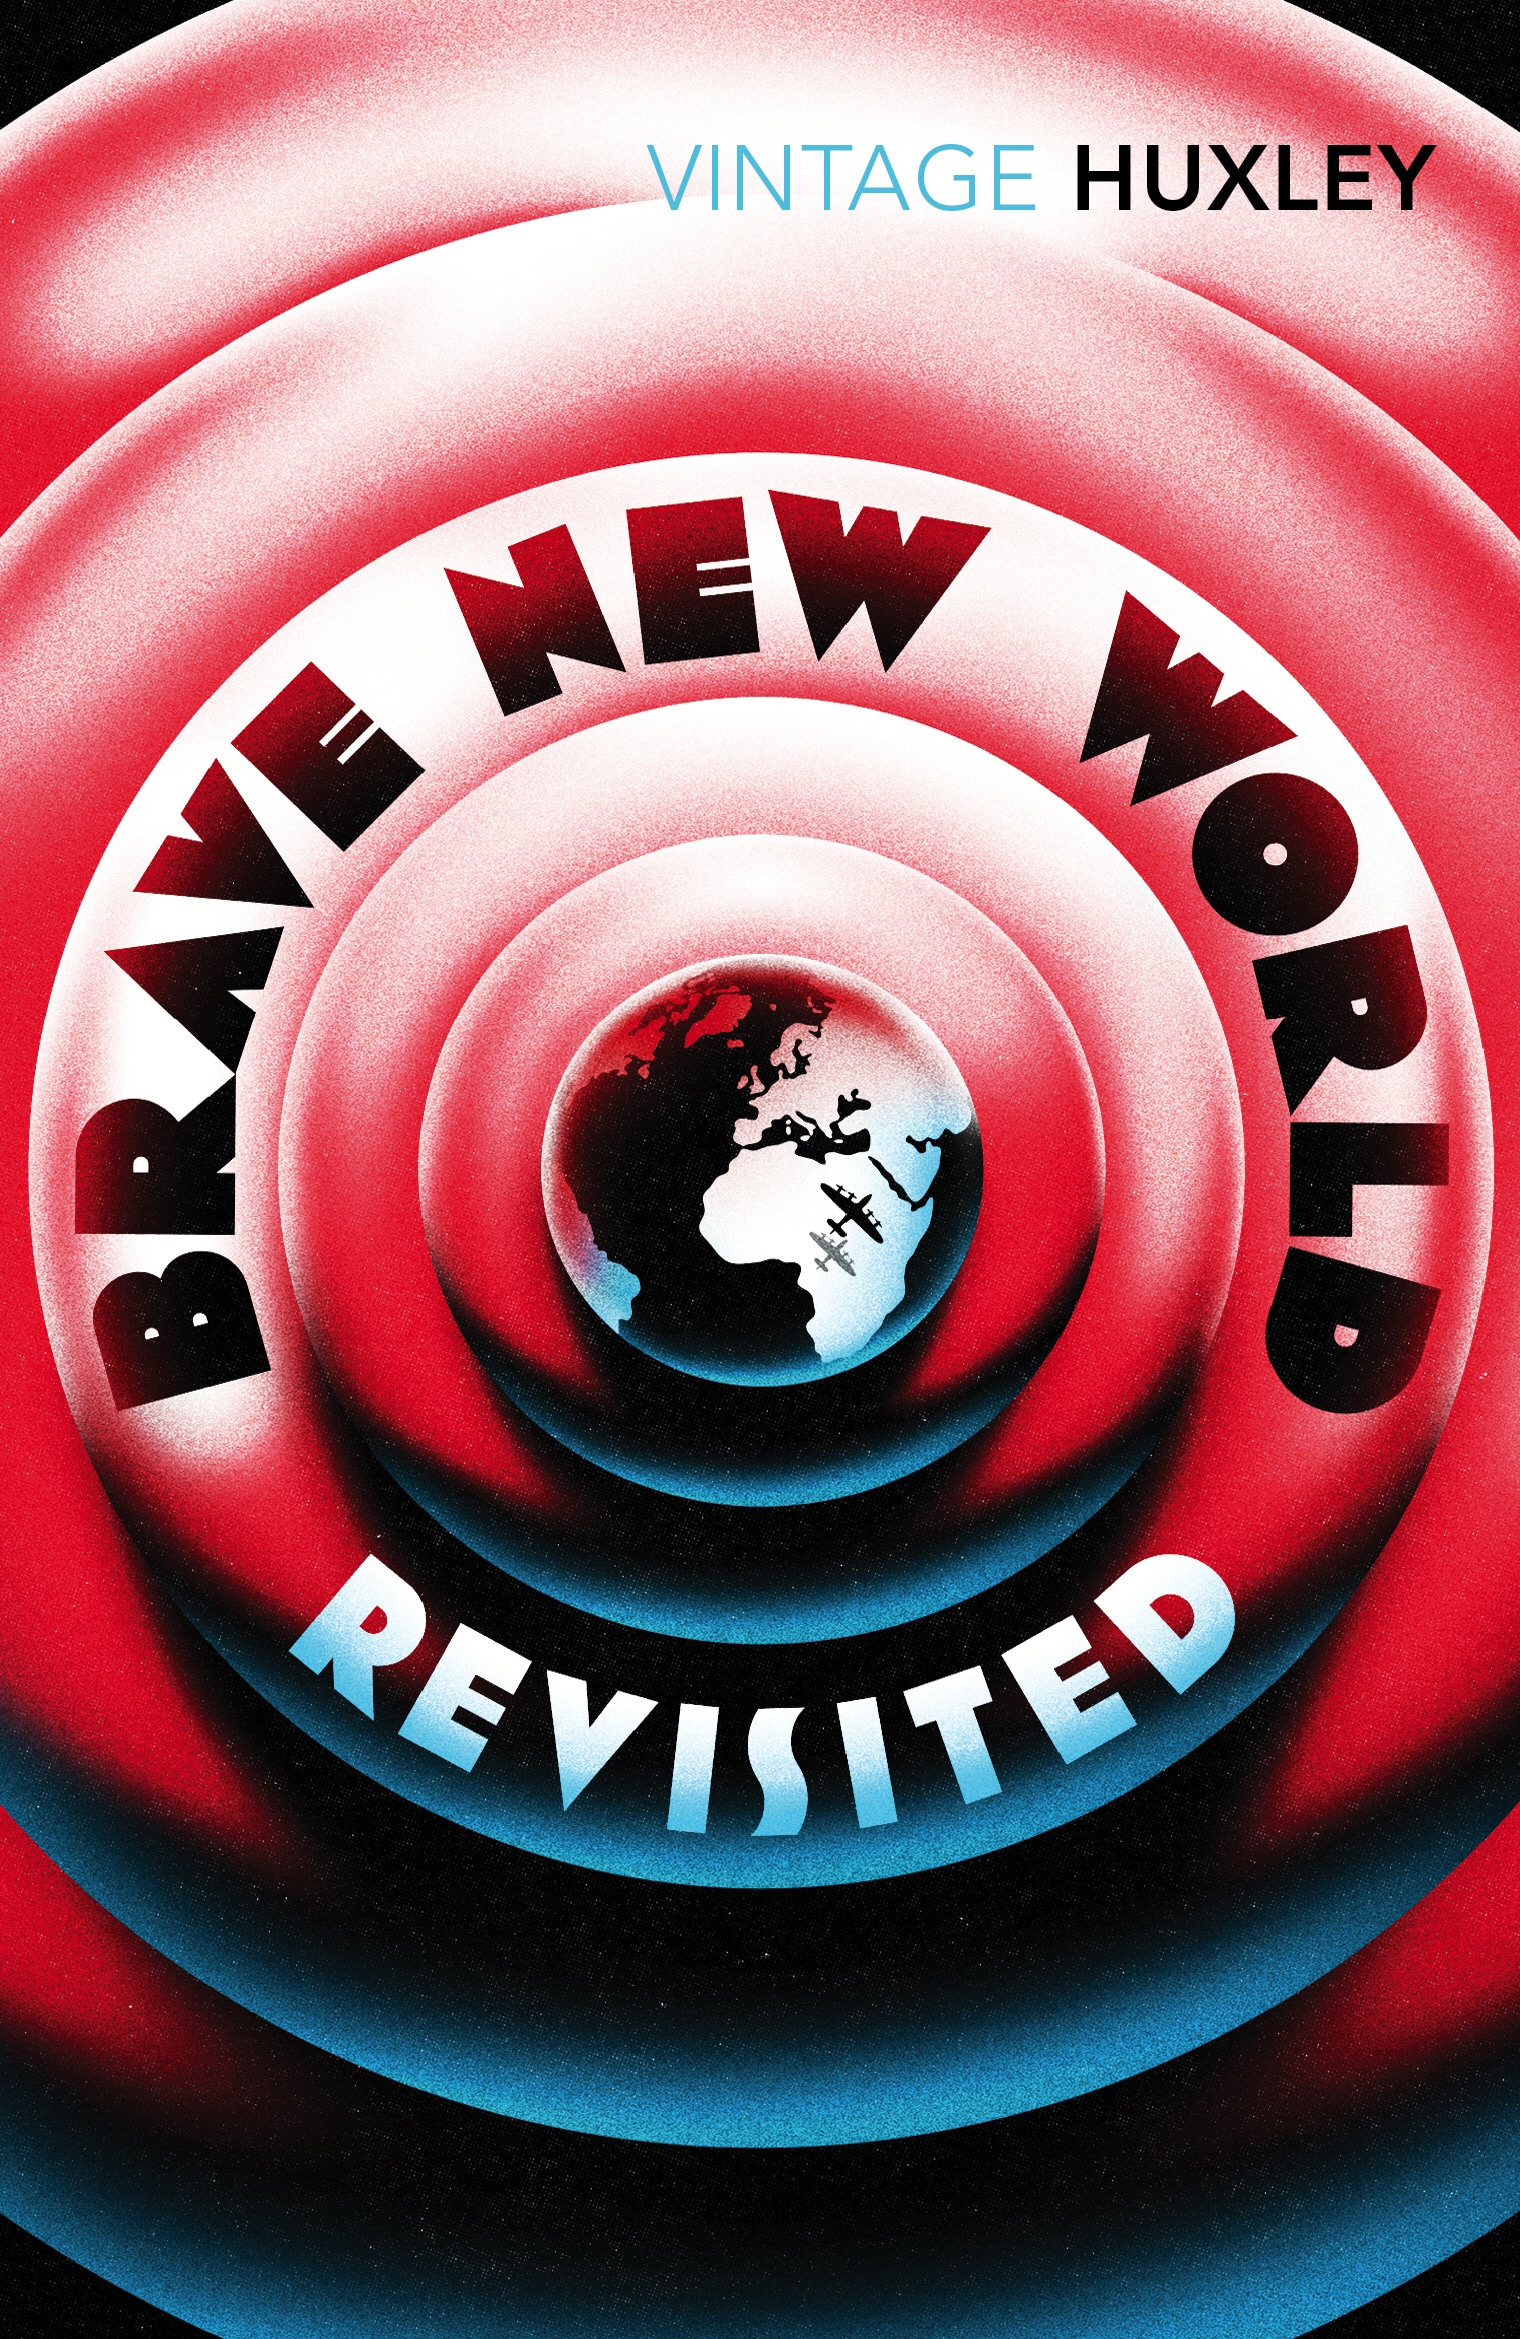 Book “Brave New World Revisited” by Aldous Huxley, David Bradshaw — September 2, 2004